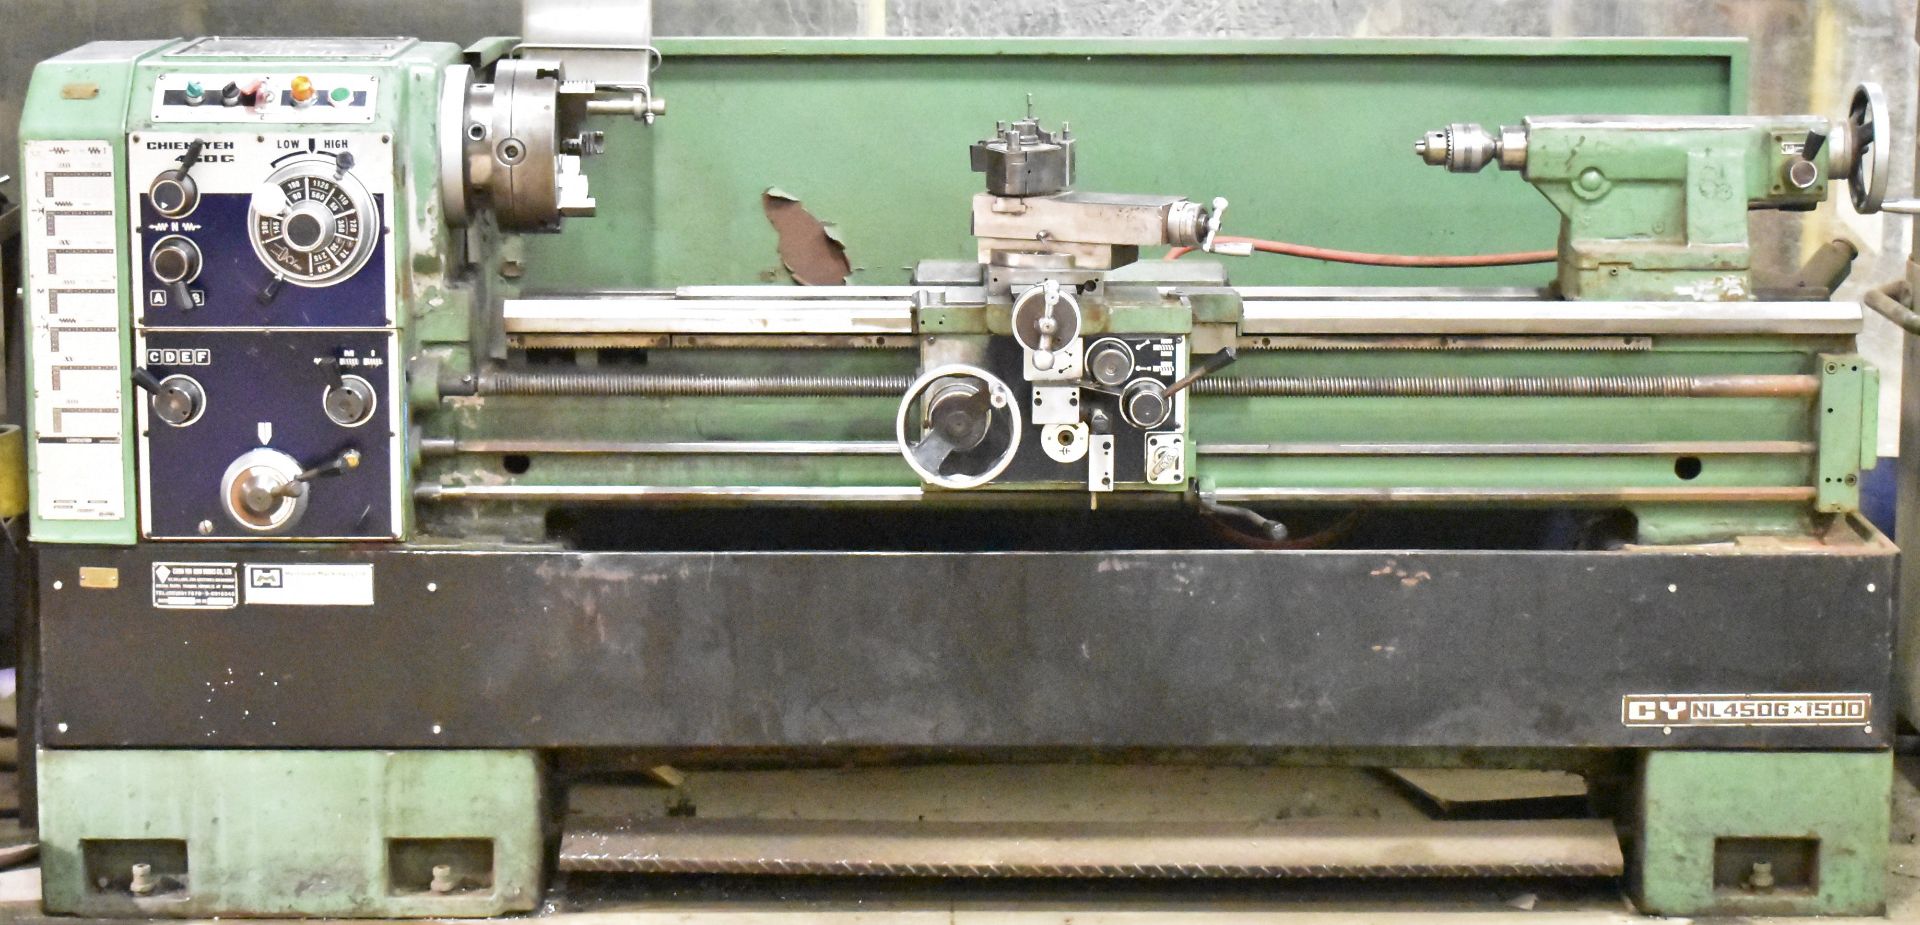 CHIEN YEH 450G GAP BED ENGINE LATHE WITH 18" SWING OVER BED, 58" BETWEEN CENTERS, SPEEDS TO 1800